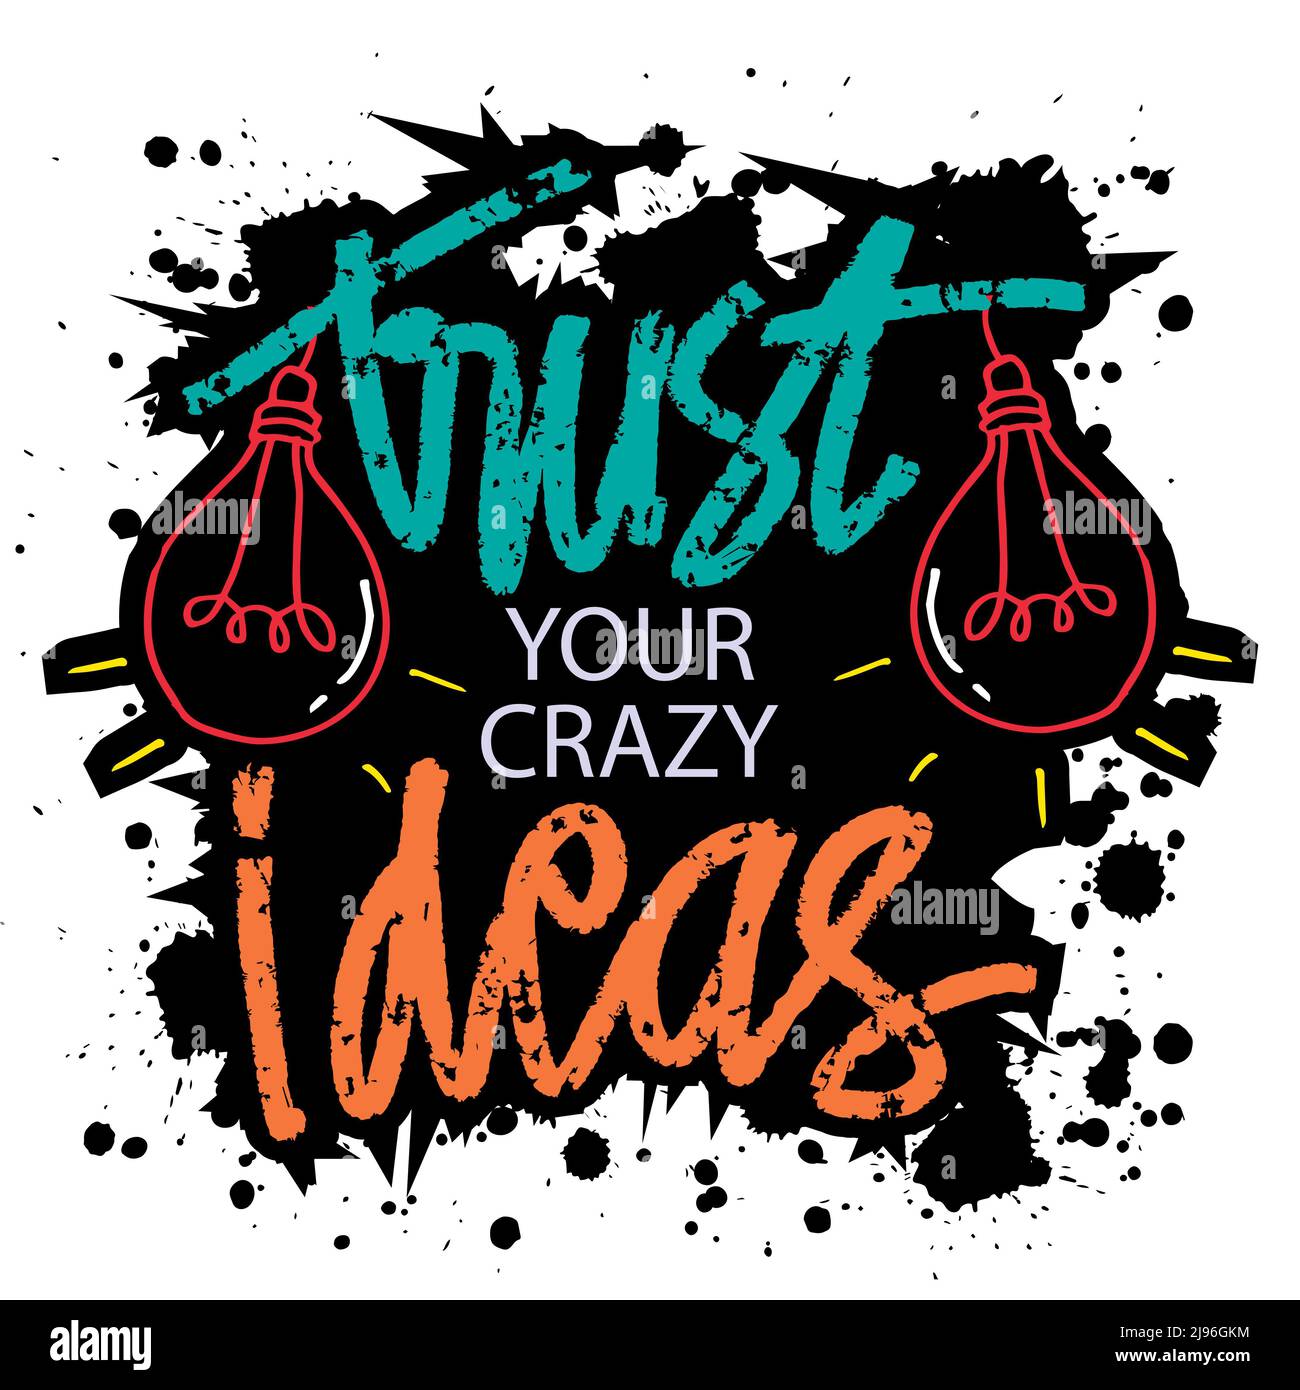 Trust your crazy ideas. Poster quotes. Stock Photo